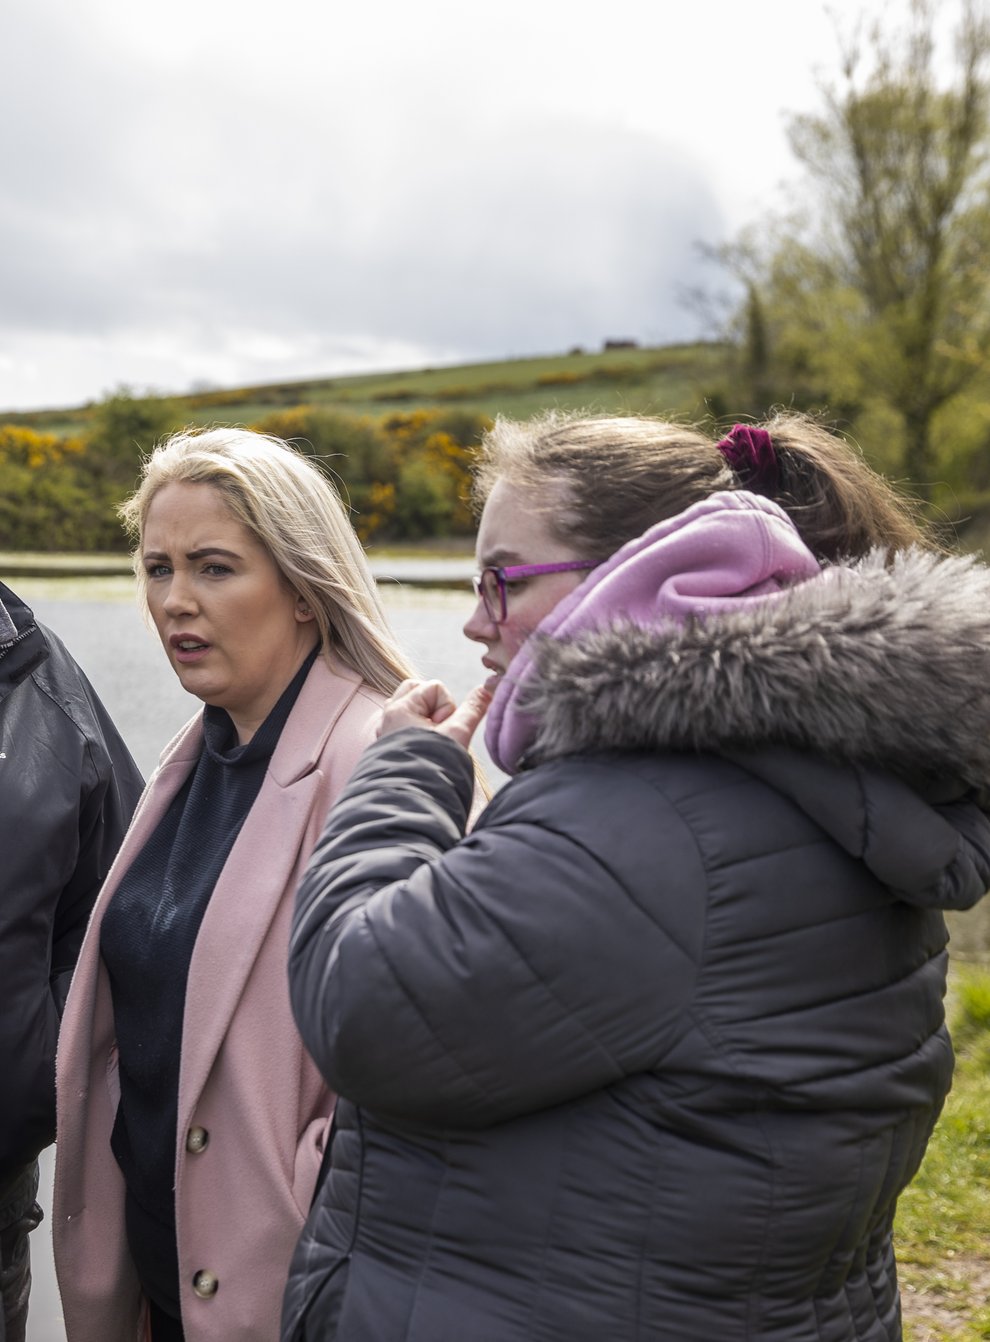 Lisa Dorrian’s family, (left to right) sister Michelle, father John, sister Joanne, and sister Ciara, attending a media briefing at The Clay Pits, Ballyhalbert, Northern Ireland. Detective Superintendent Jason Murphy, who is leading the investigation into the disappearance and murder of Lisa Dorrian in February 2005, has updated members of the media on a large scale search operation currently taking place (Liam McBurney/PA)